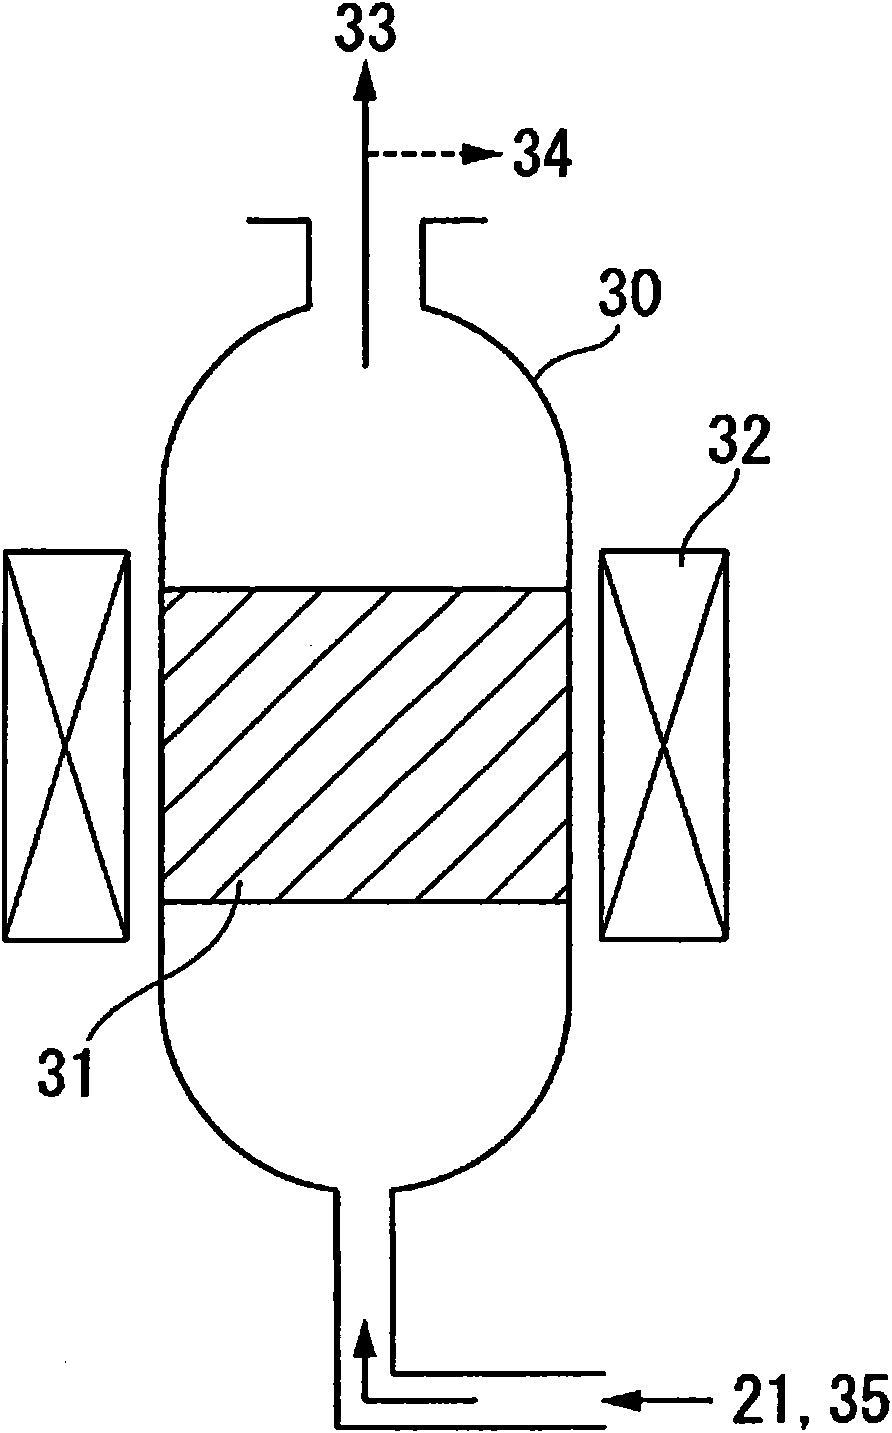 Method for removing magnetic particles from fischer-tropsch synthetic crude oil and method for manufacturing fischer-tropsch synthetic crude oil